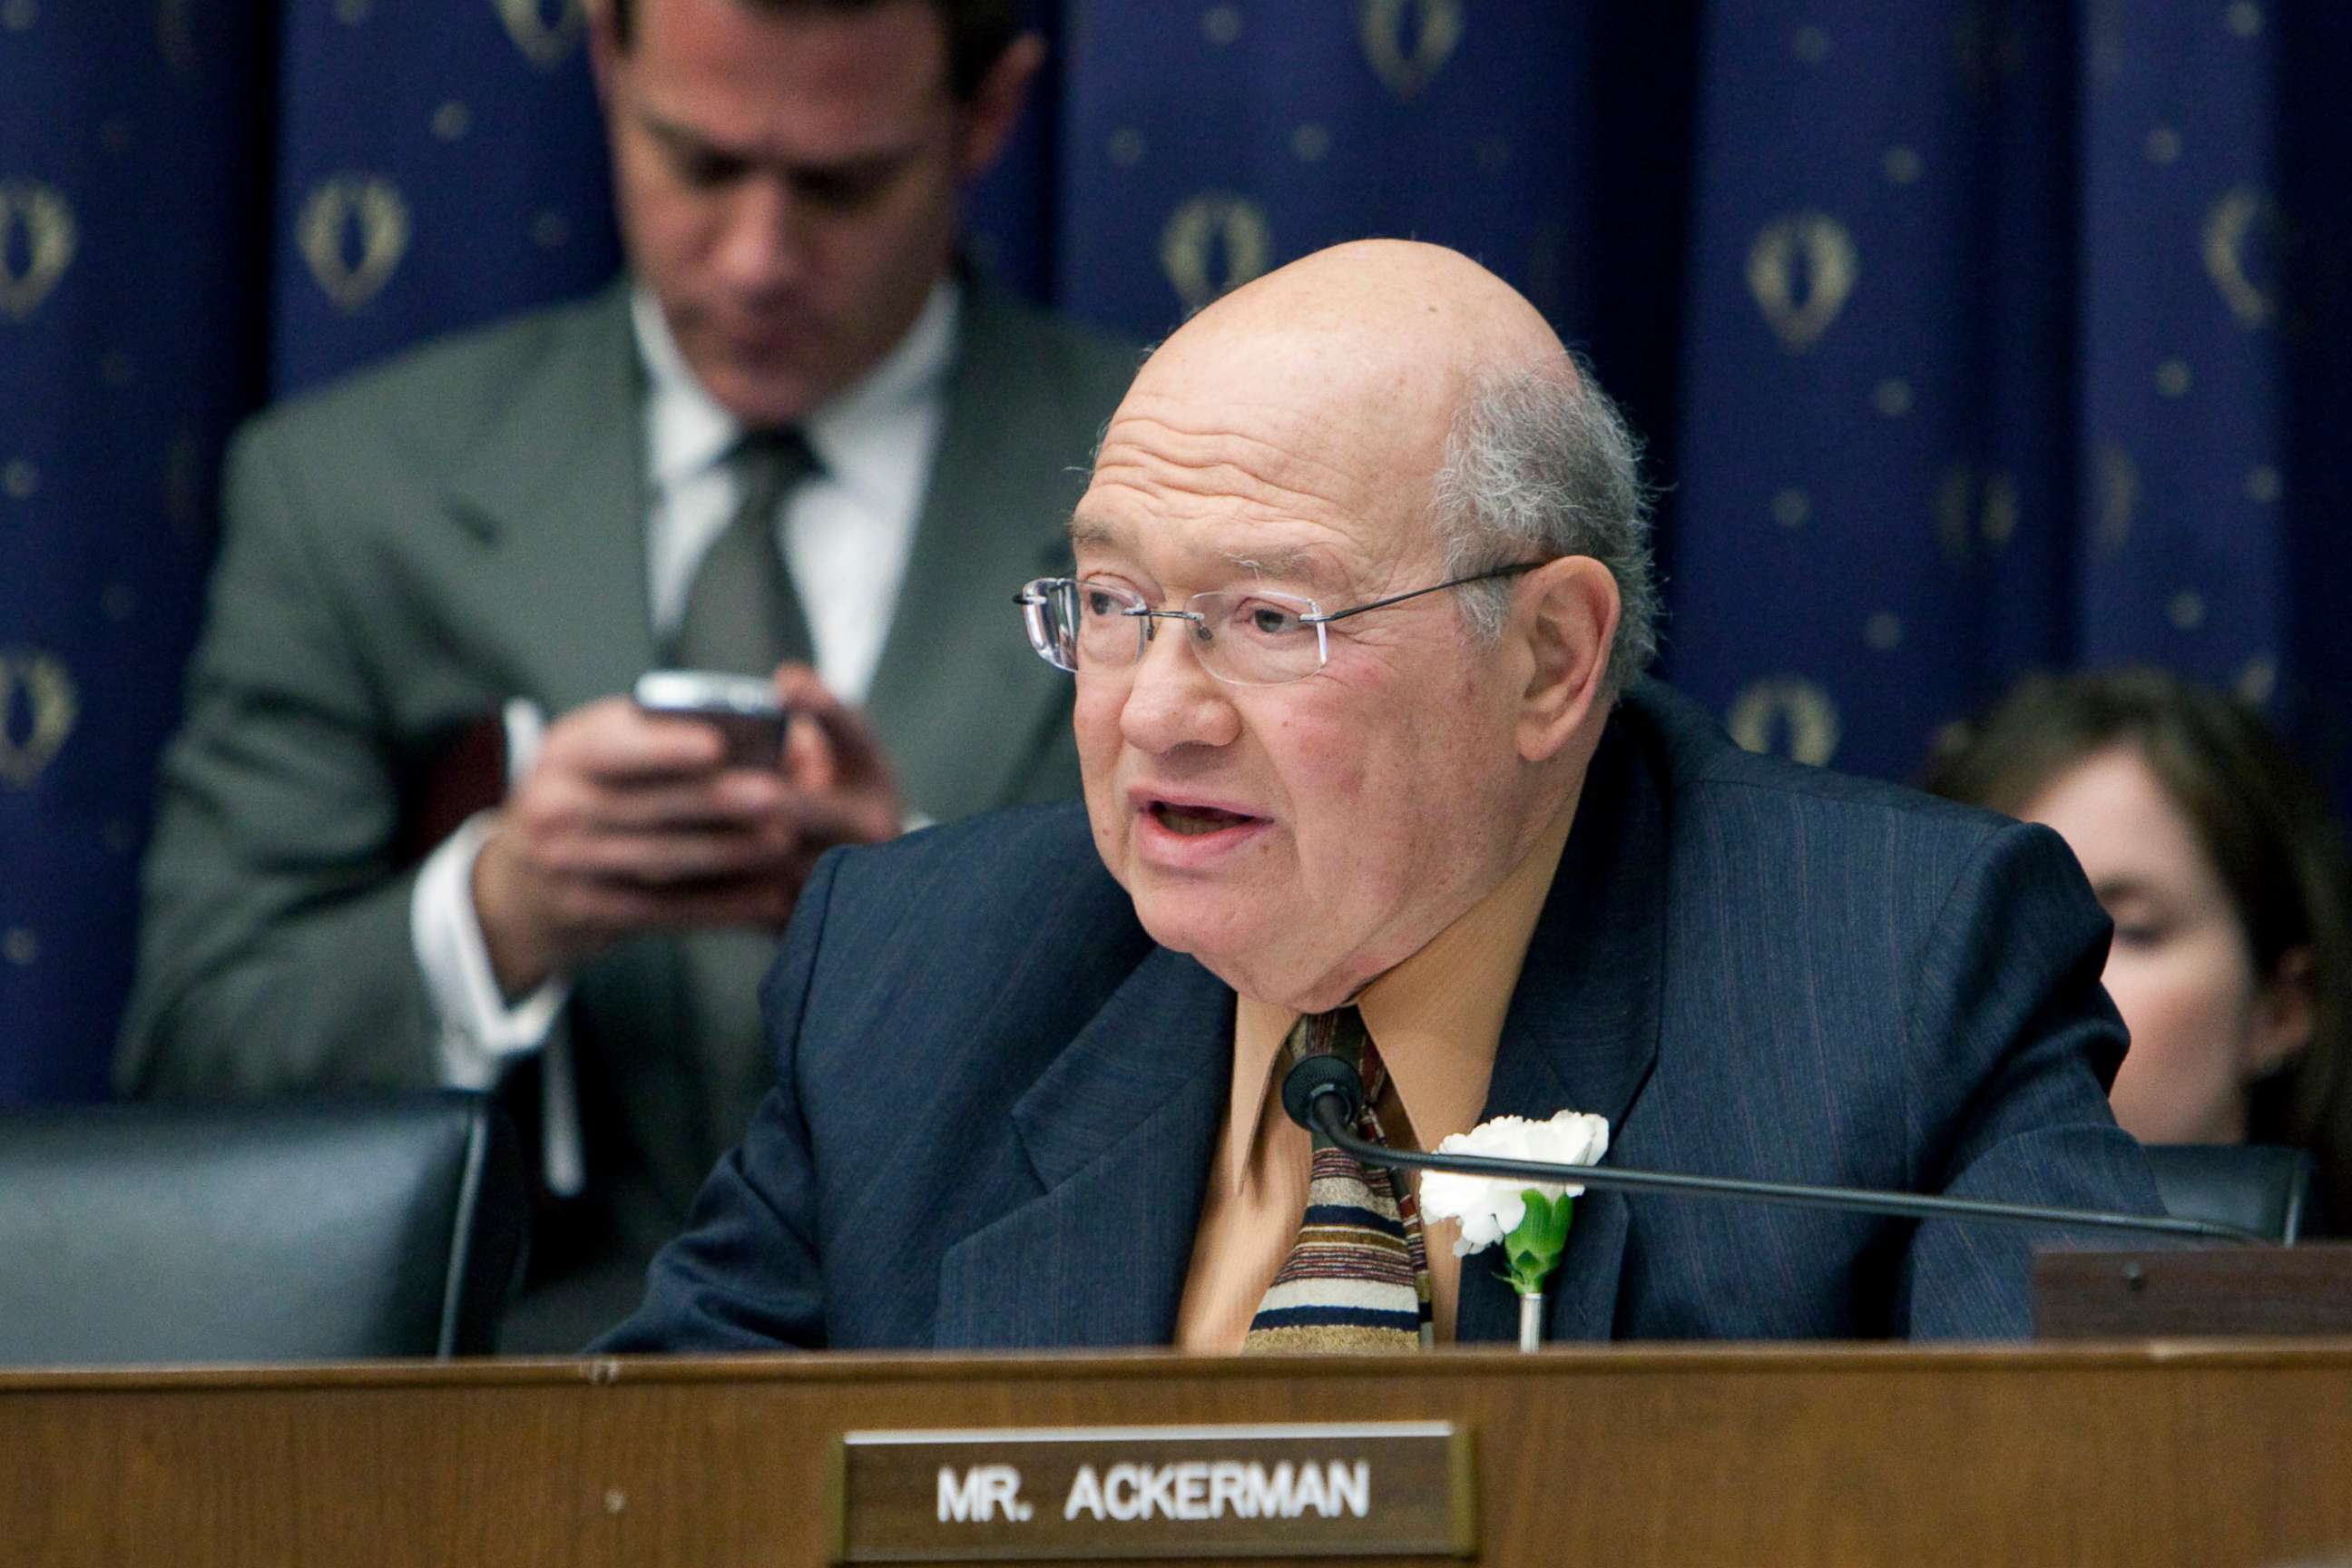 PHOTO: Rep. Gary Ackerman, a Democrat from New York, questions bank executives during a House Financial Services Committee hearing in Washington, D.C., Feb. 11, 2009.